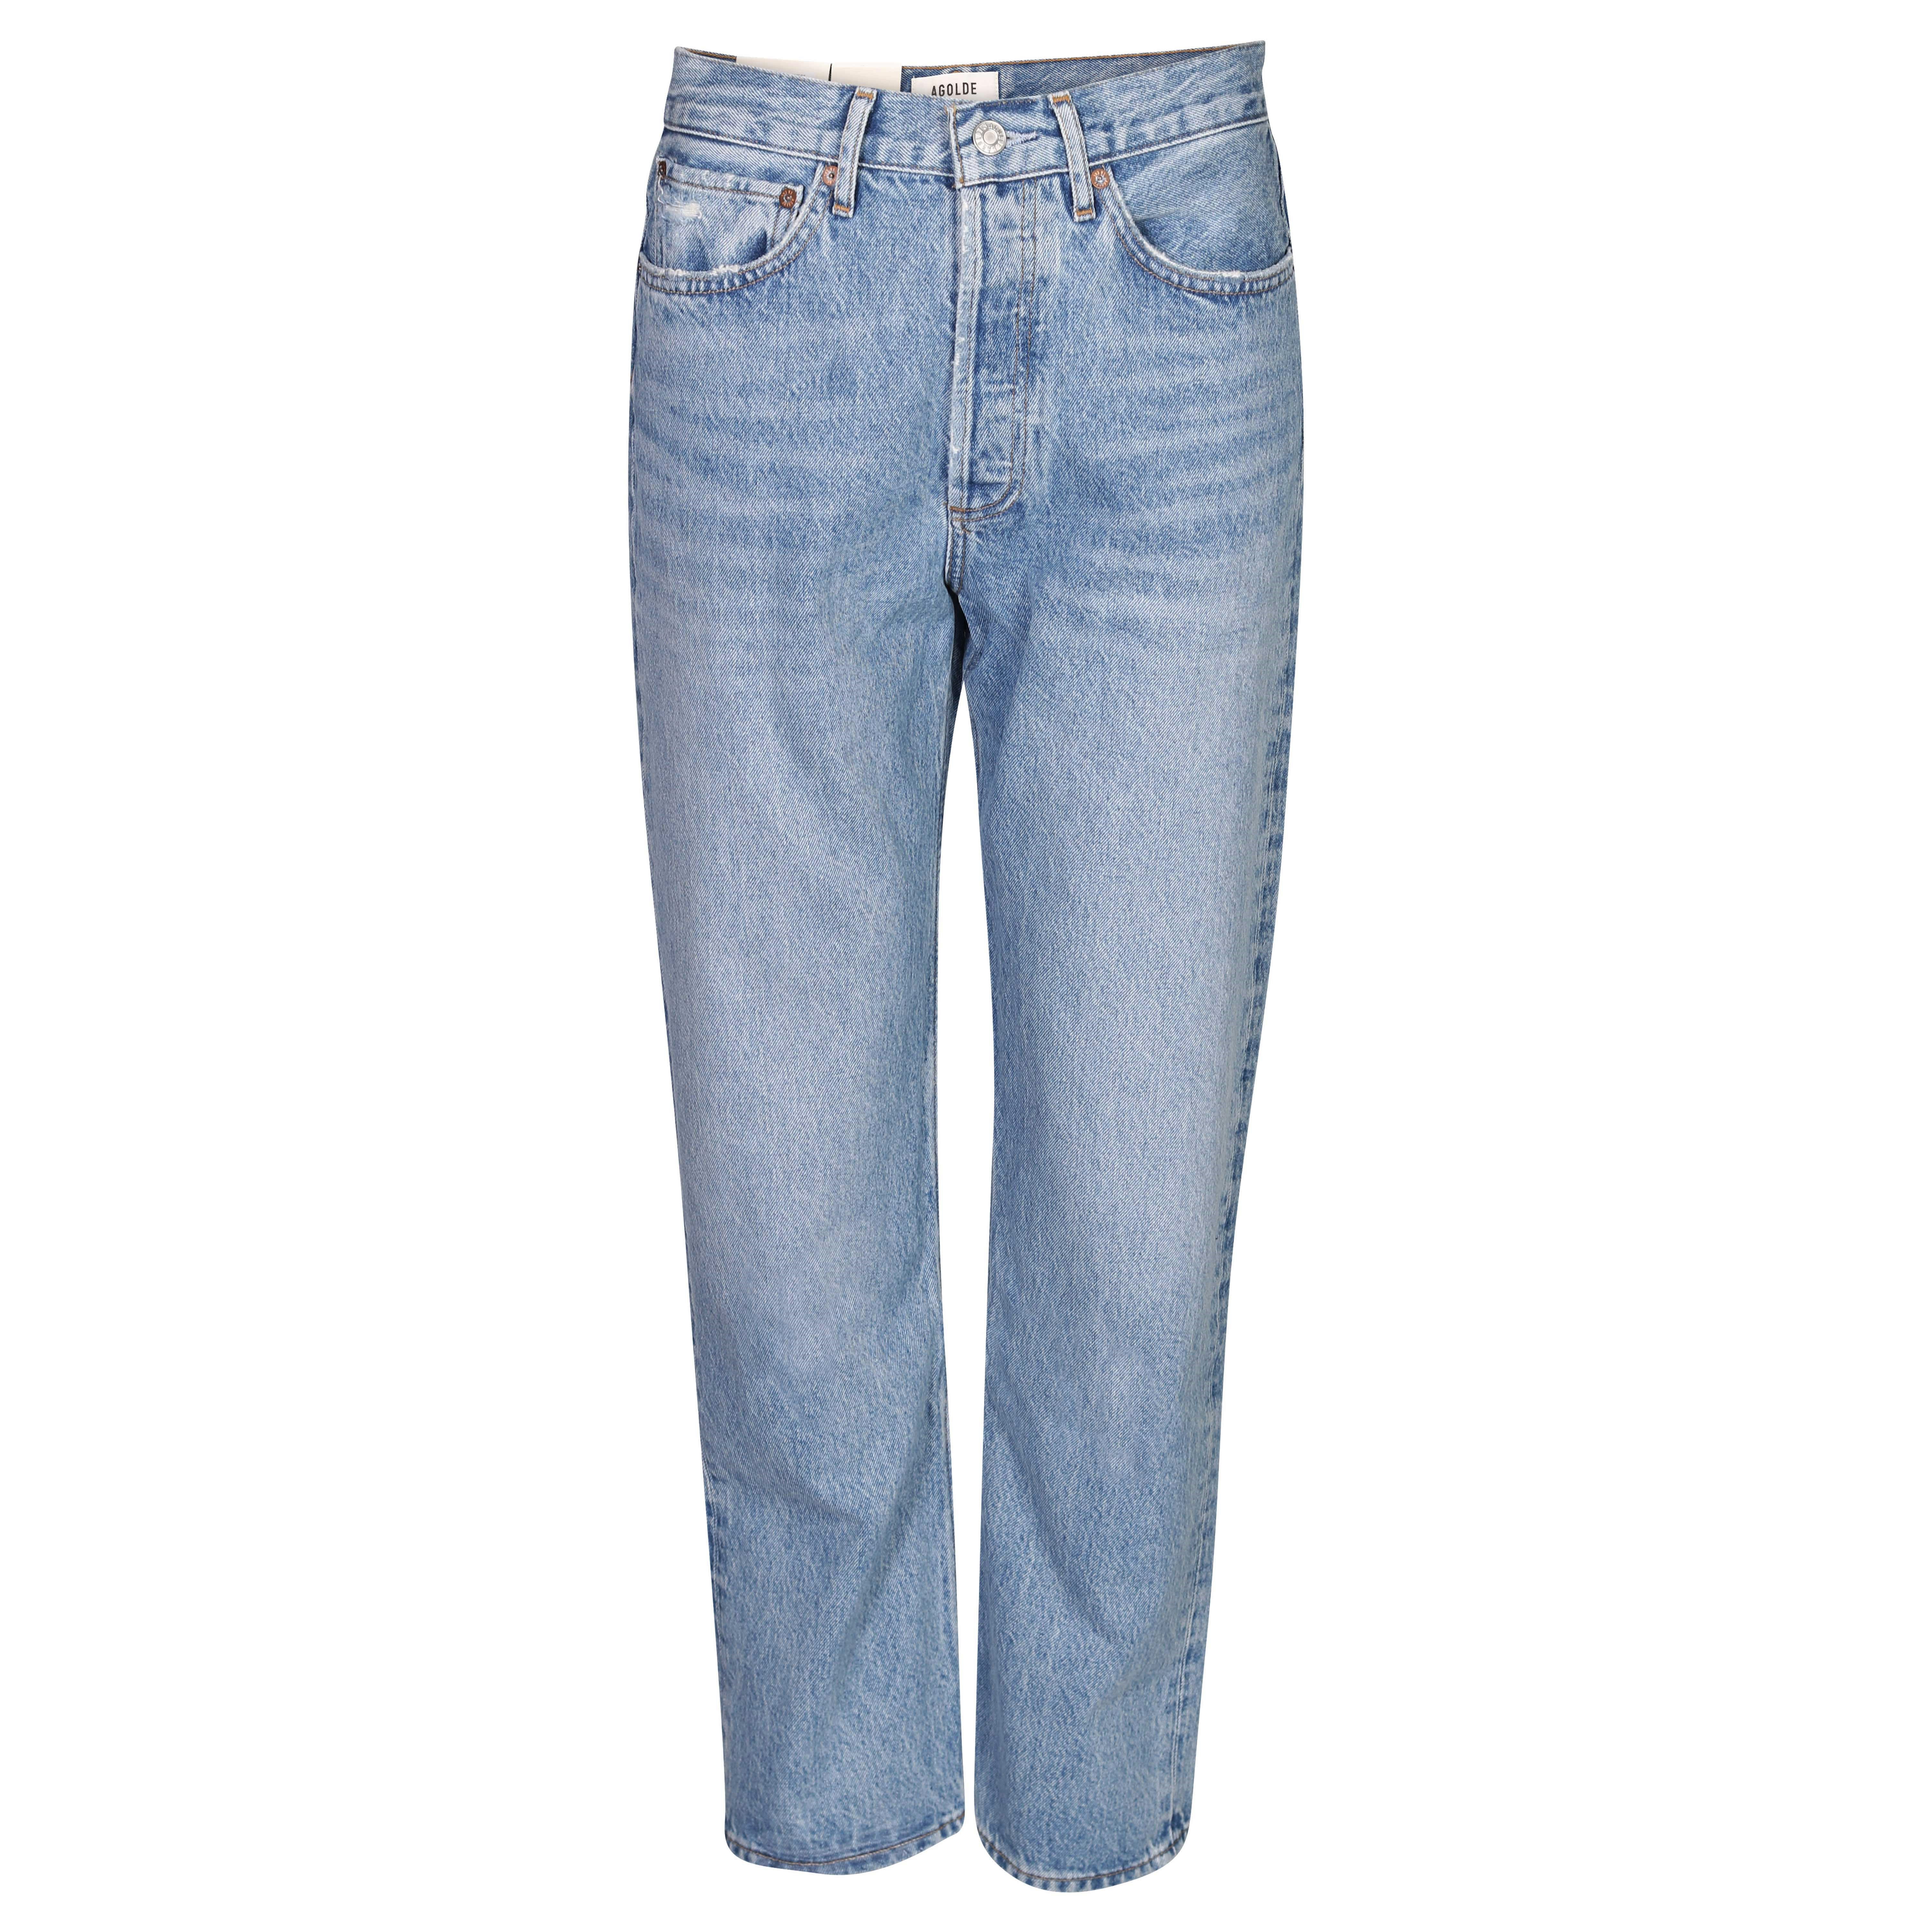 Agolde Jeans 90s Cropped in Scheme Washing W 30